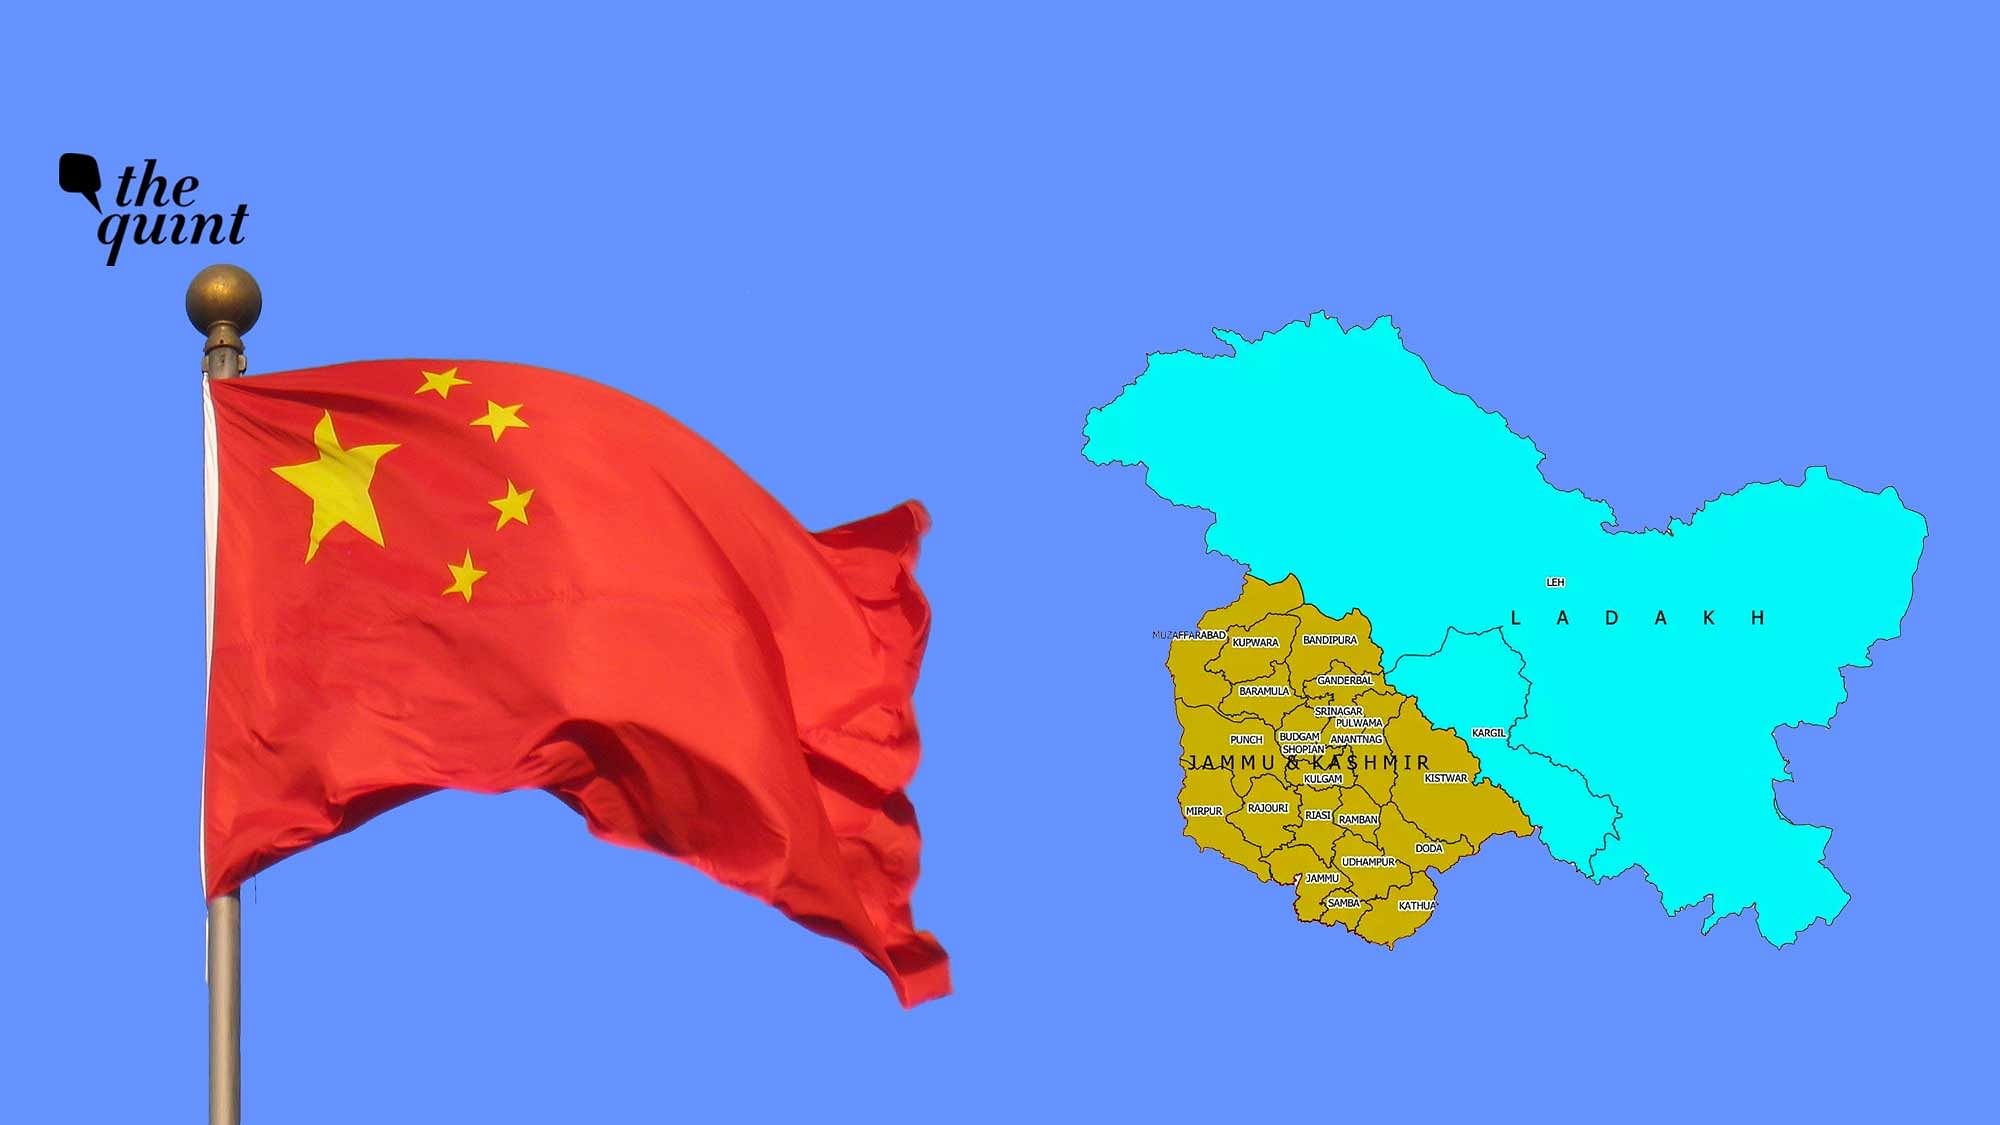 Image of flag of China and maps of newly-formed Union Territories of J&amp;K and Ladakh, used for representational purposes.